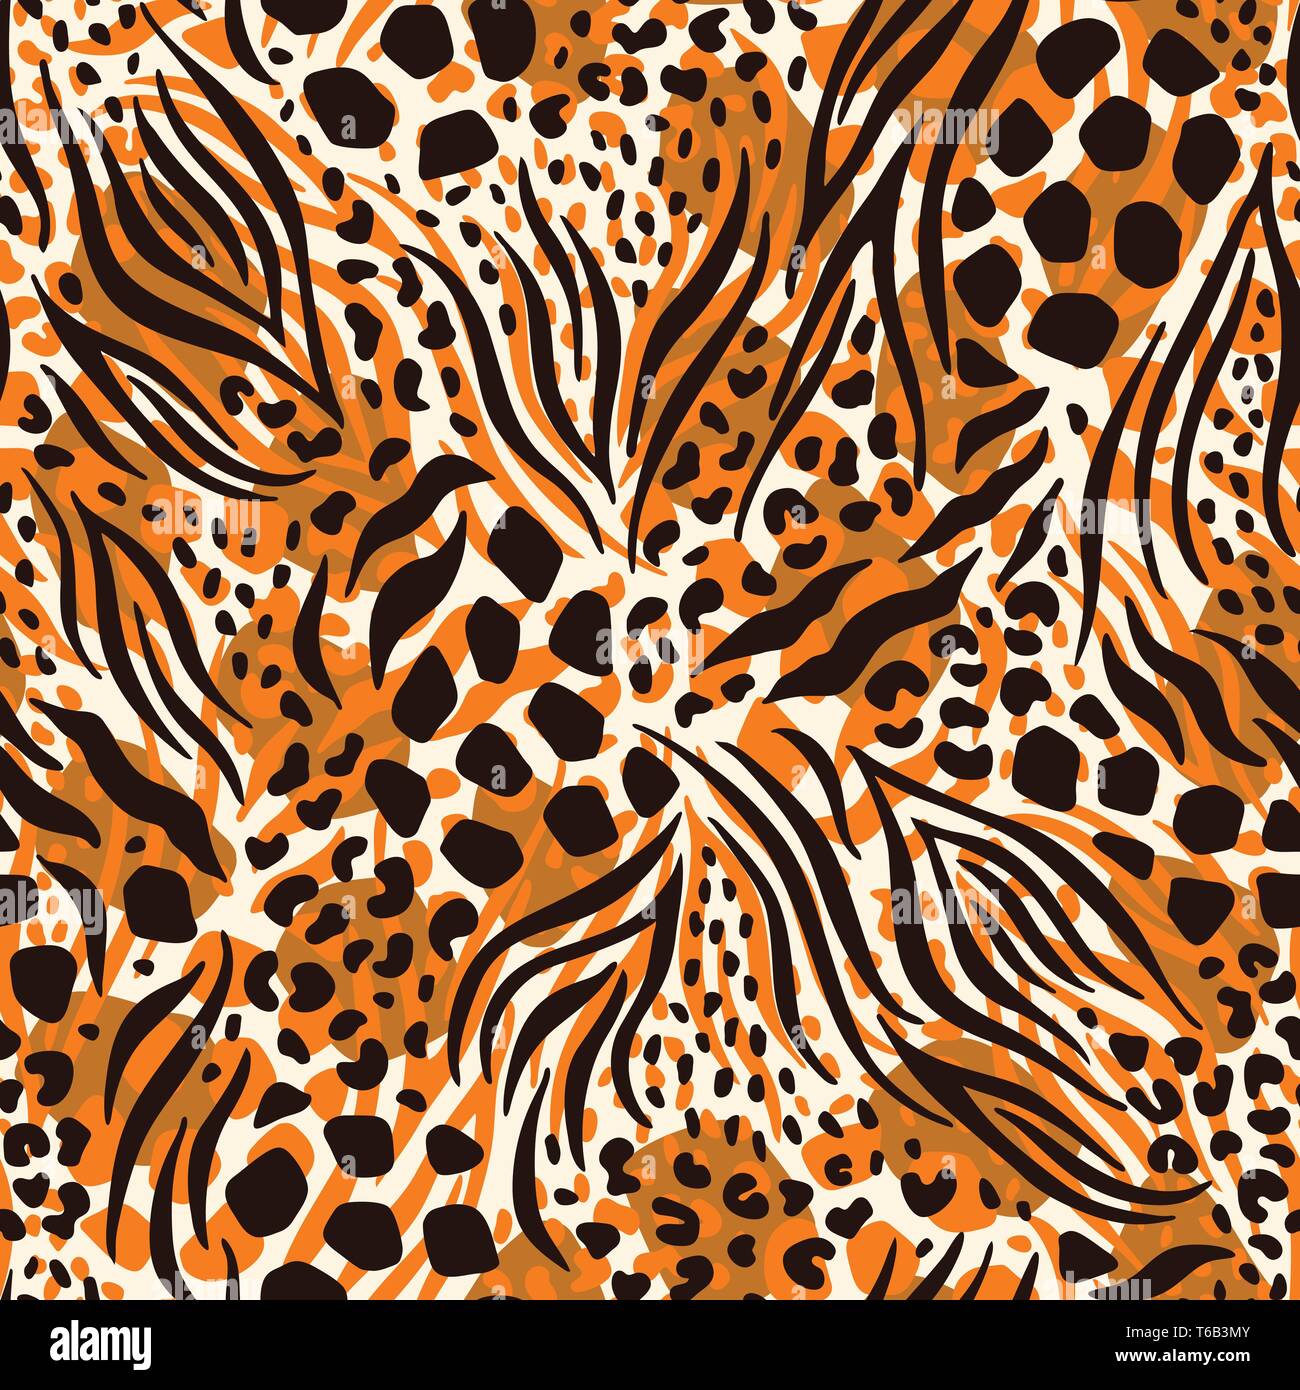 Abstract Hand Drawn Combined Animal Skin Vector Seamless Pattern